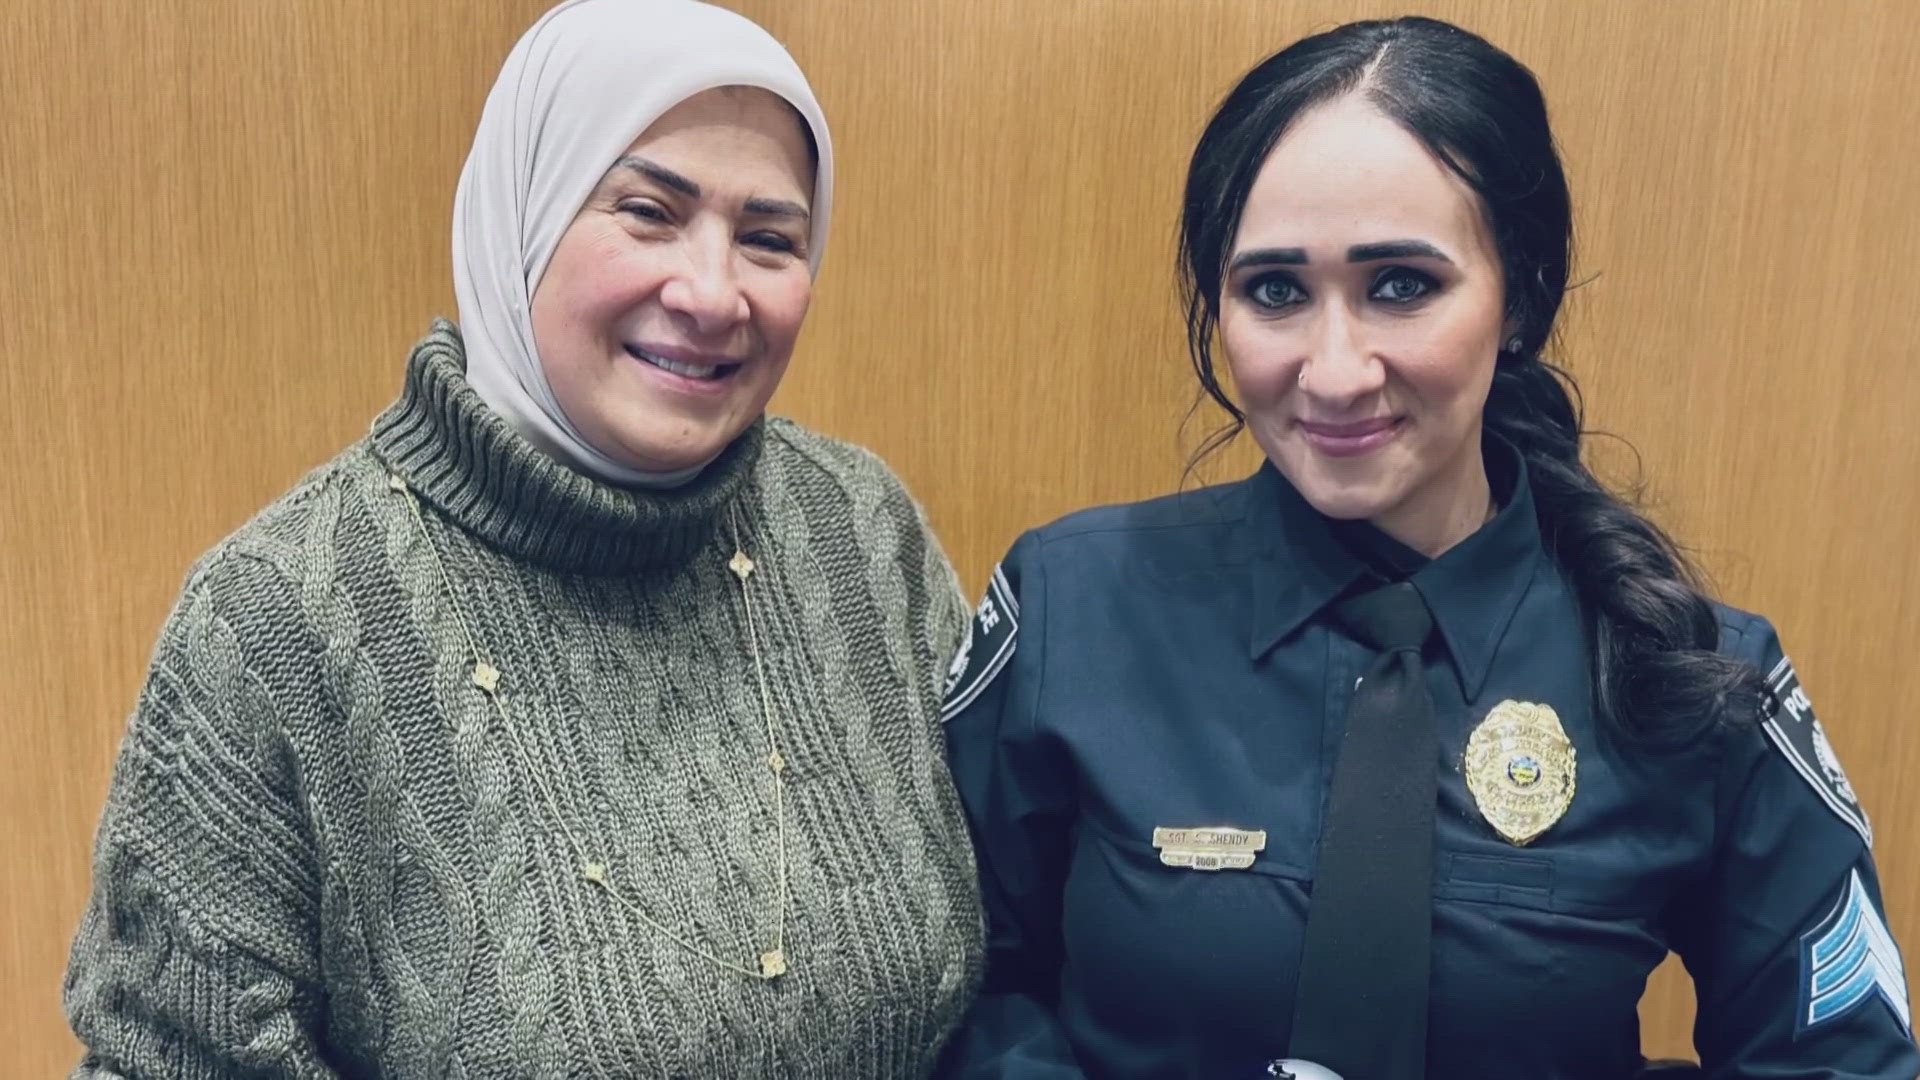 Lt. Sarah Shendy grew up in Saudi Arabia and is living her American dream on Case Western Reserve University's police force. 3News' Lydia Esparra reports.